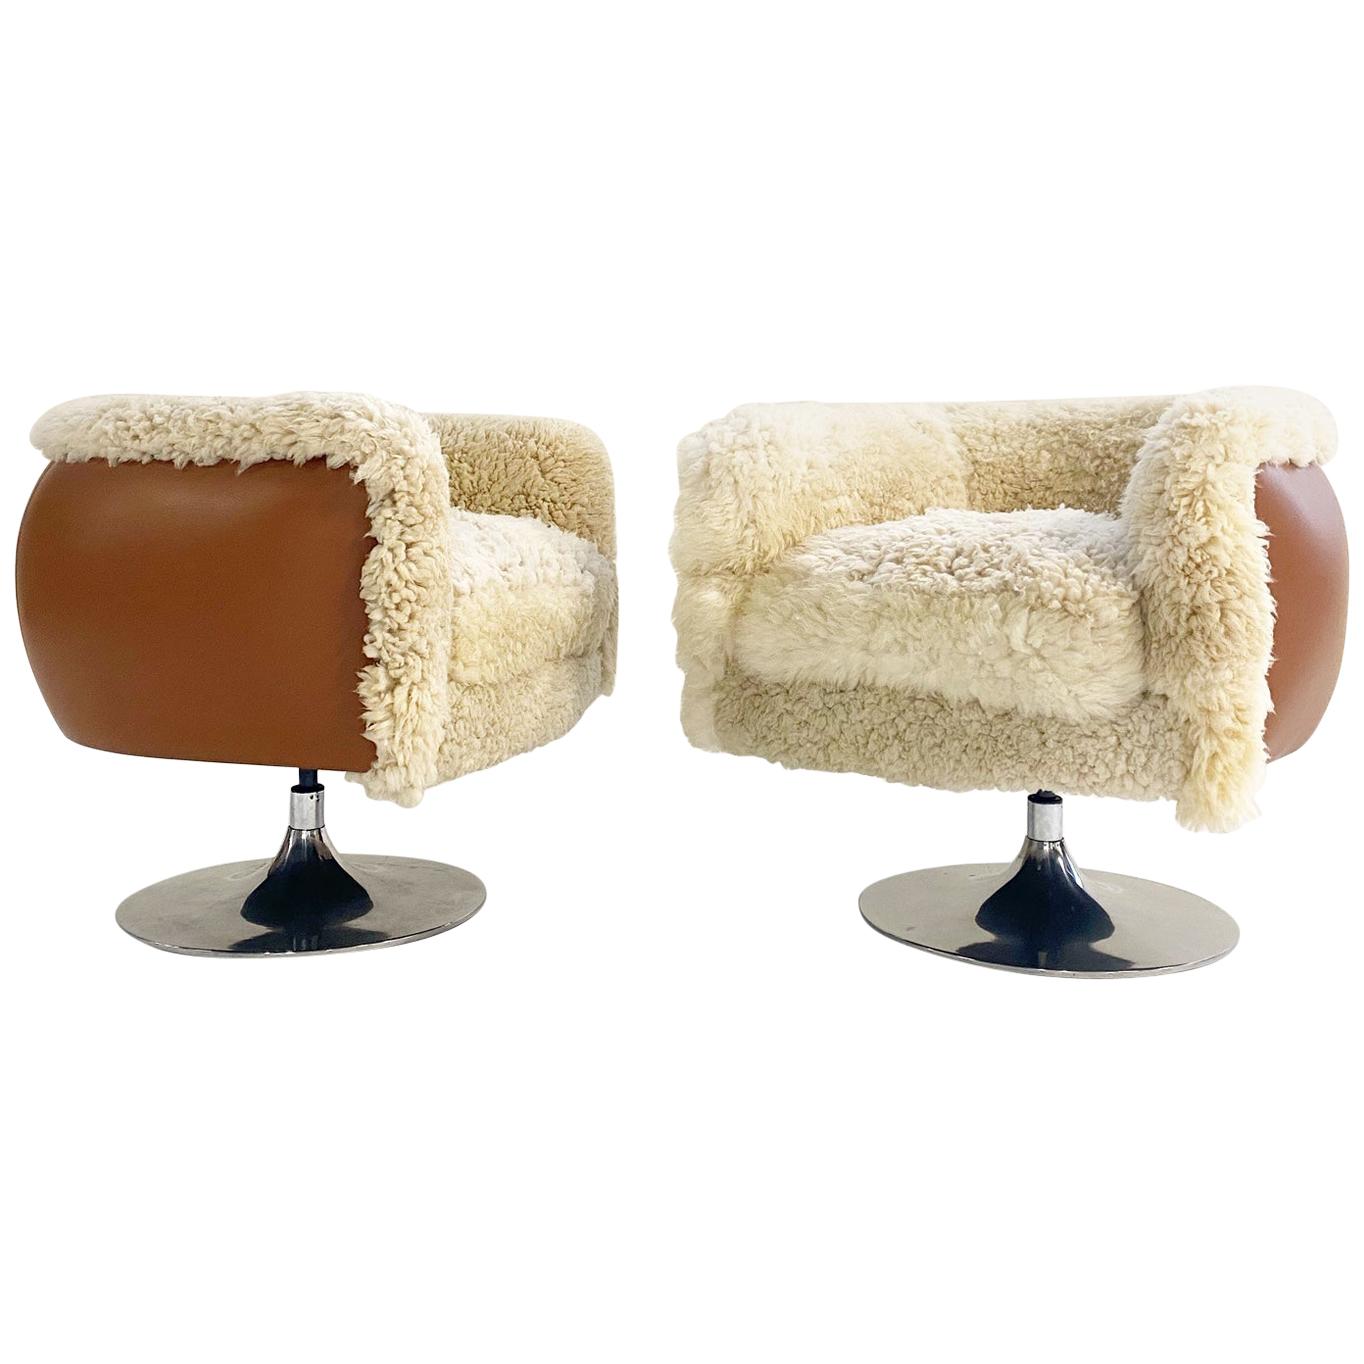 Vintage Knoll Swivel Chairs in California Sheepskin and Loro Piana Leather